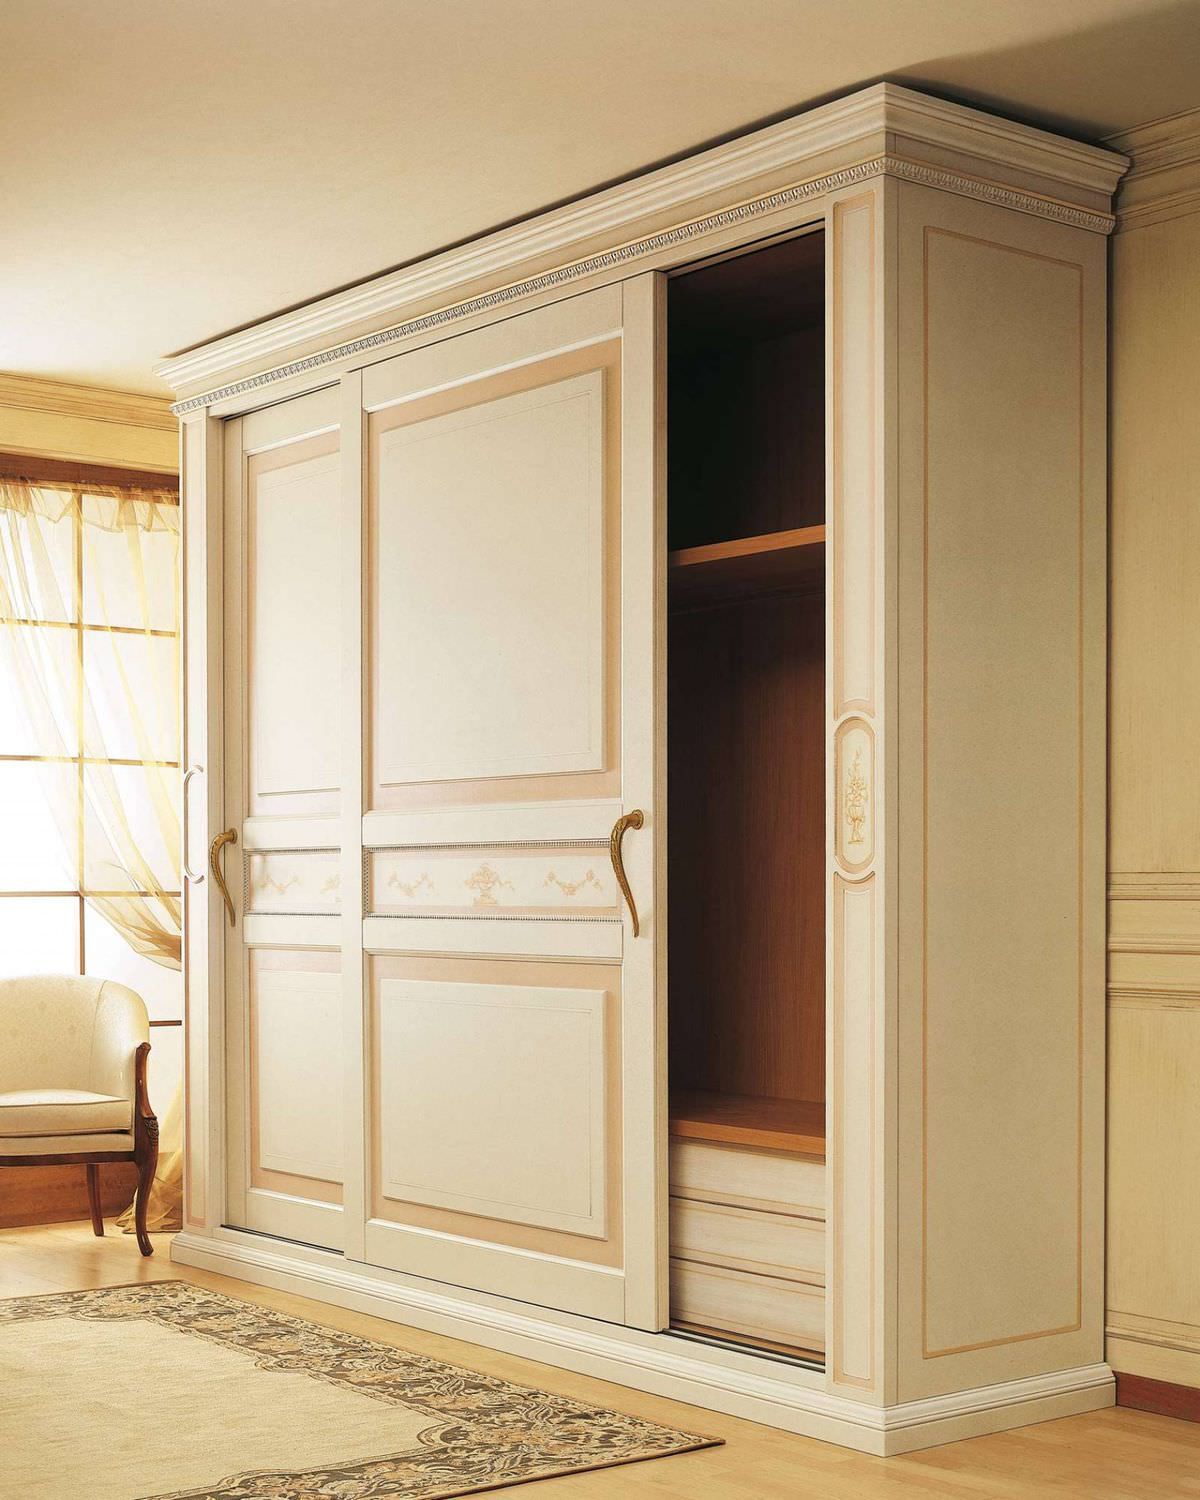 2018 Traditional Wardrobe – Canova – Vimercati Meda Luxury Classic Furniture –  Wooden / Sliding Door / Beige Throughout Traditional Wardrobes (View 7 of 10)